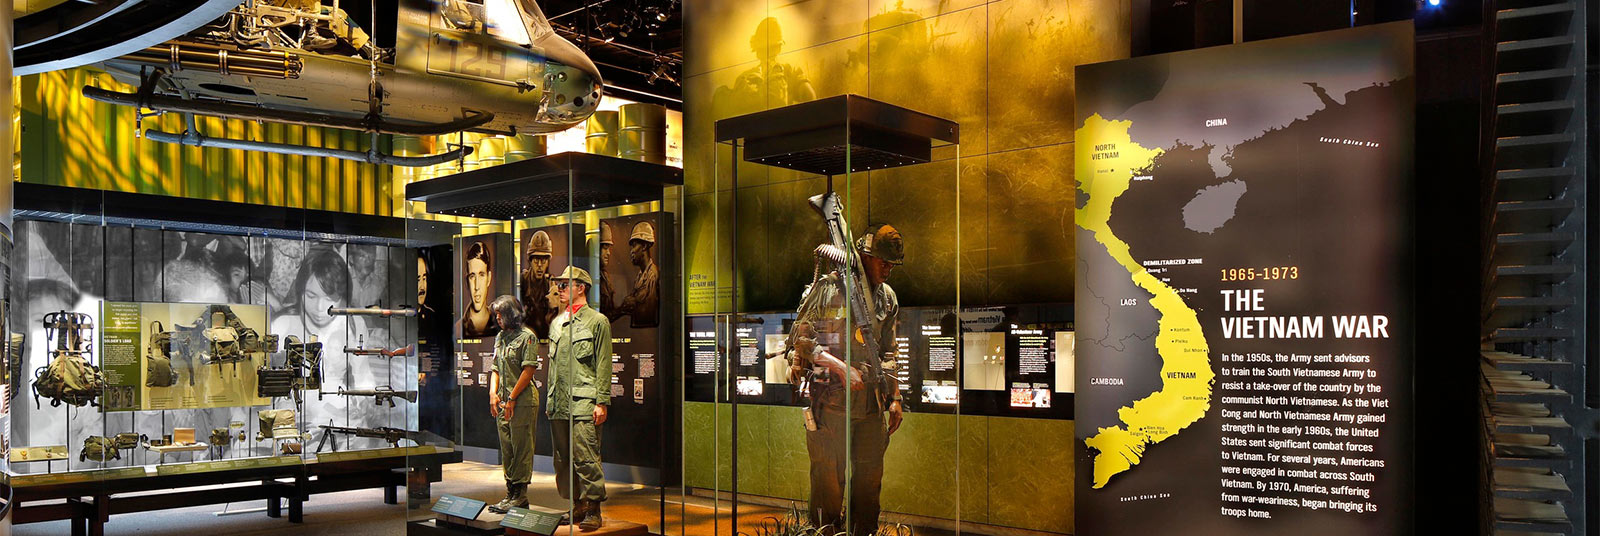 Exhibit space inside the National Museum of the United States Army featuring a helicopter suspended from the ceiling.